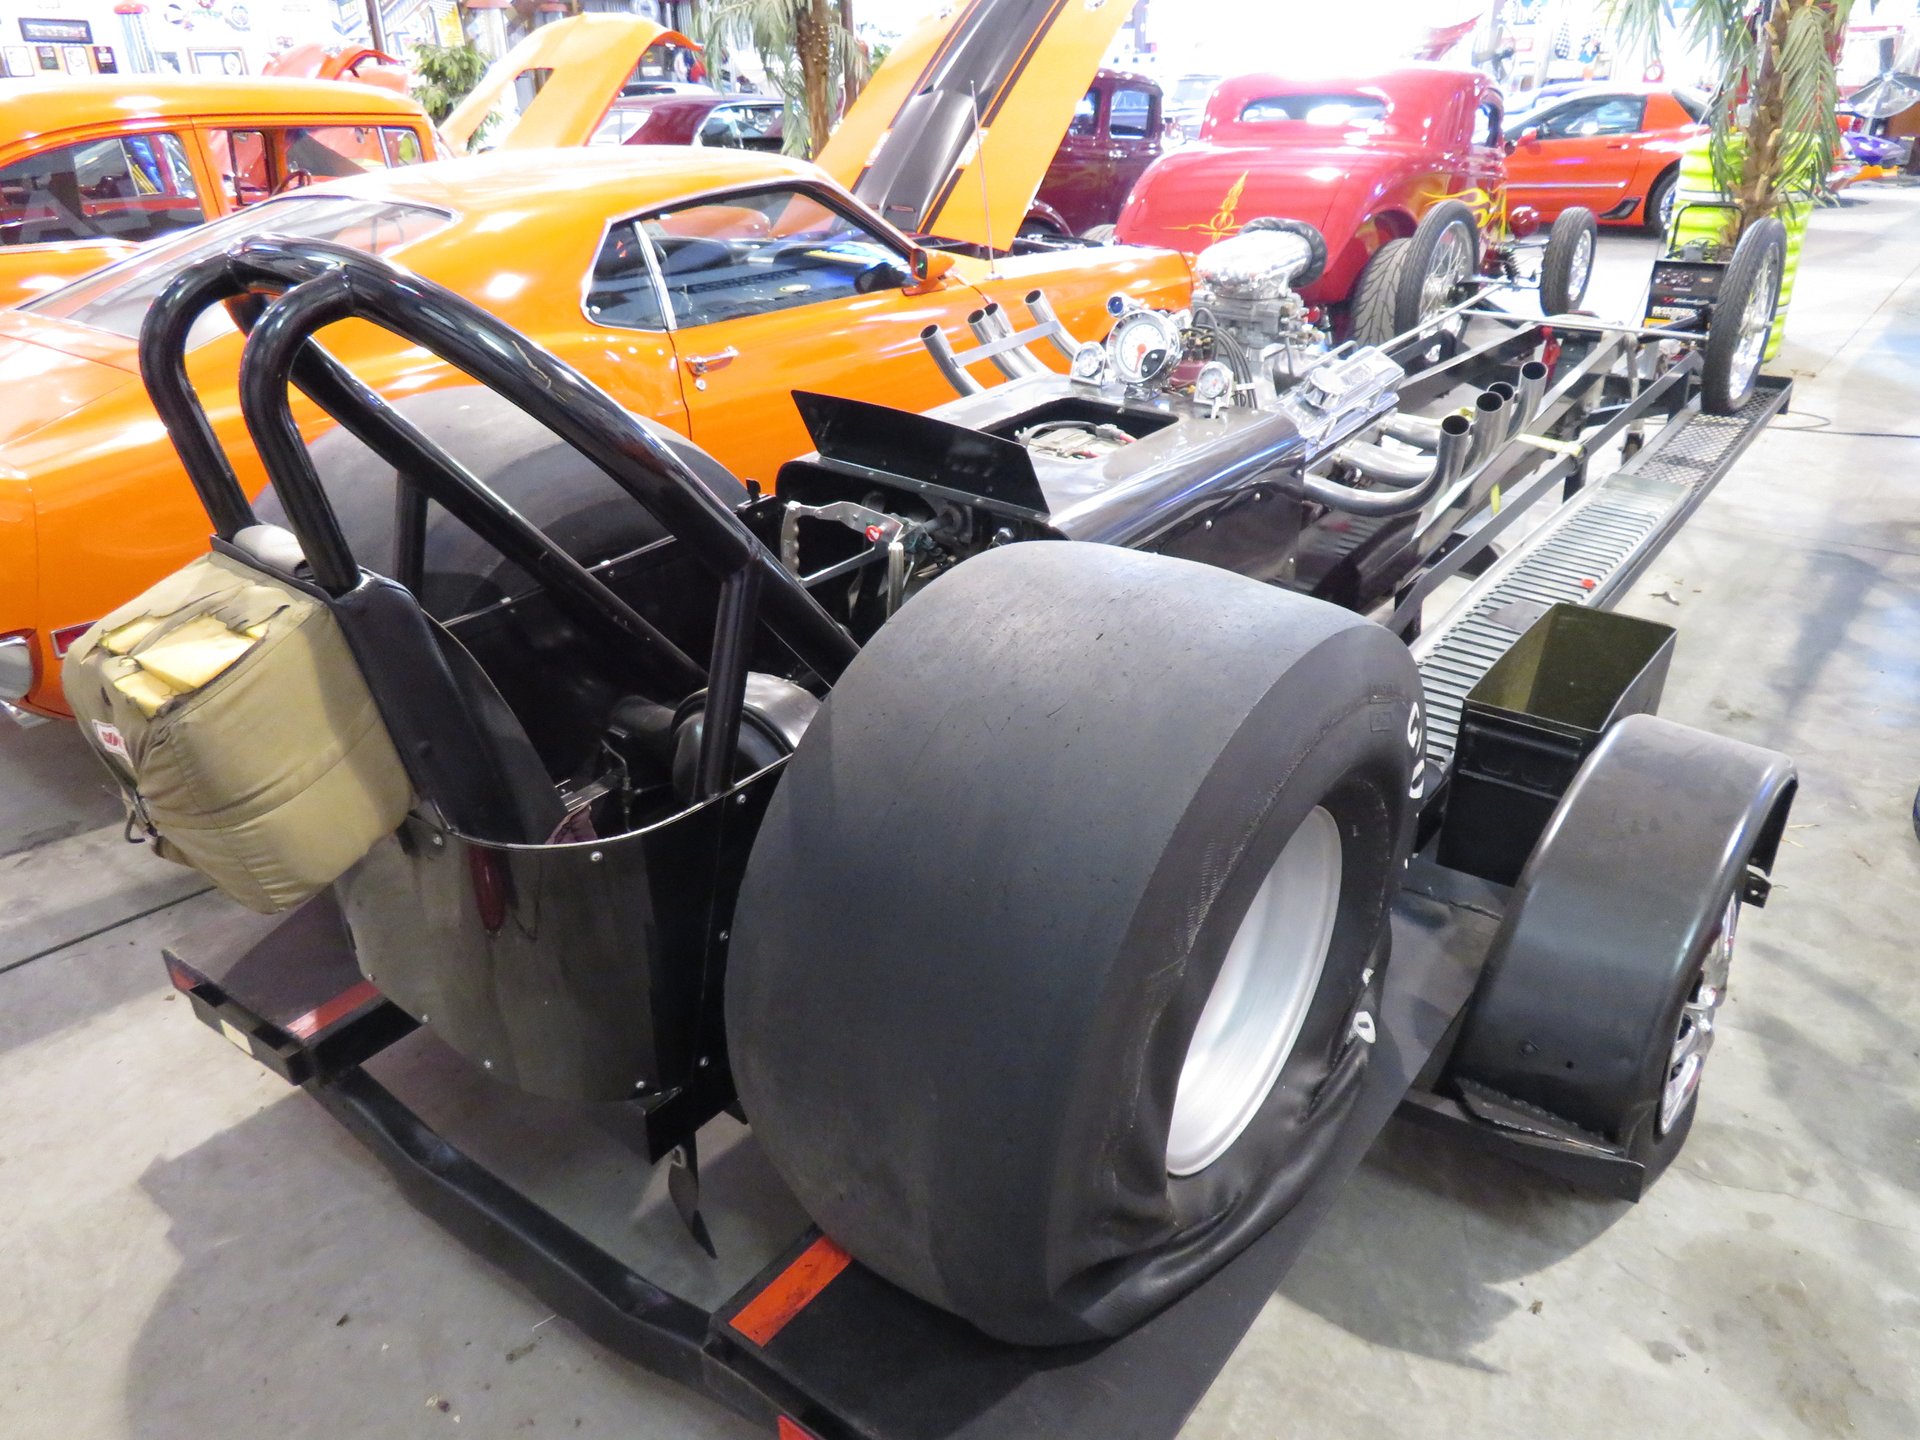  Assembled Front Engine Dragster Race Car